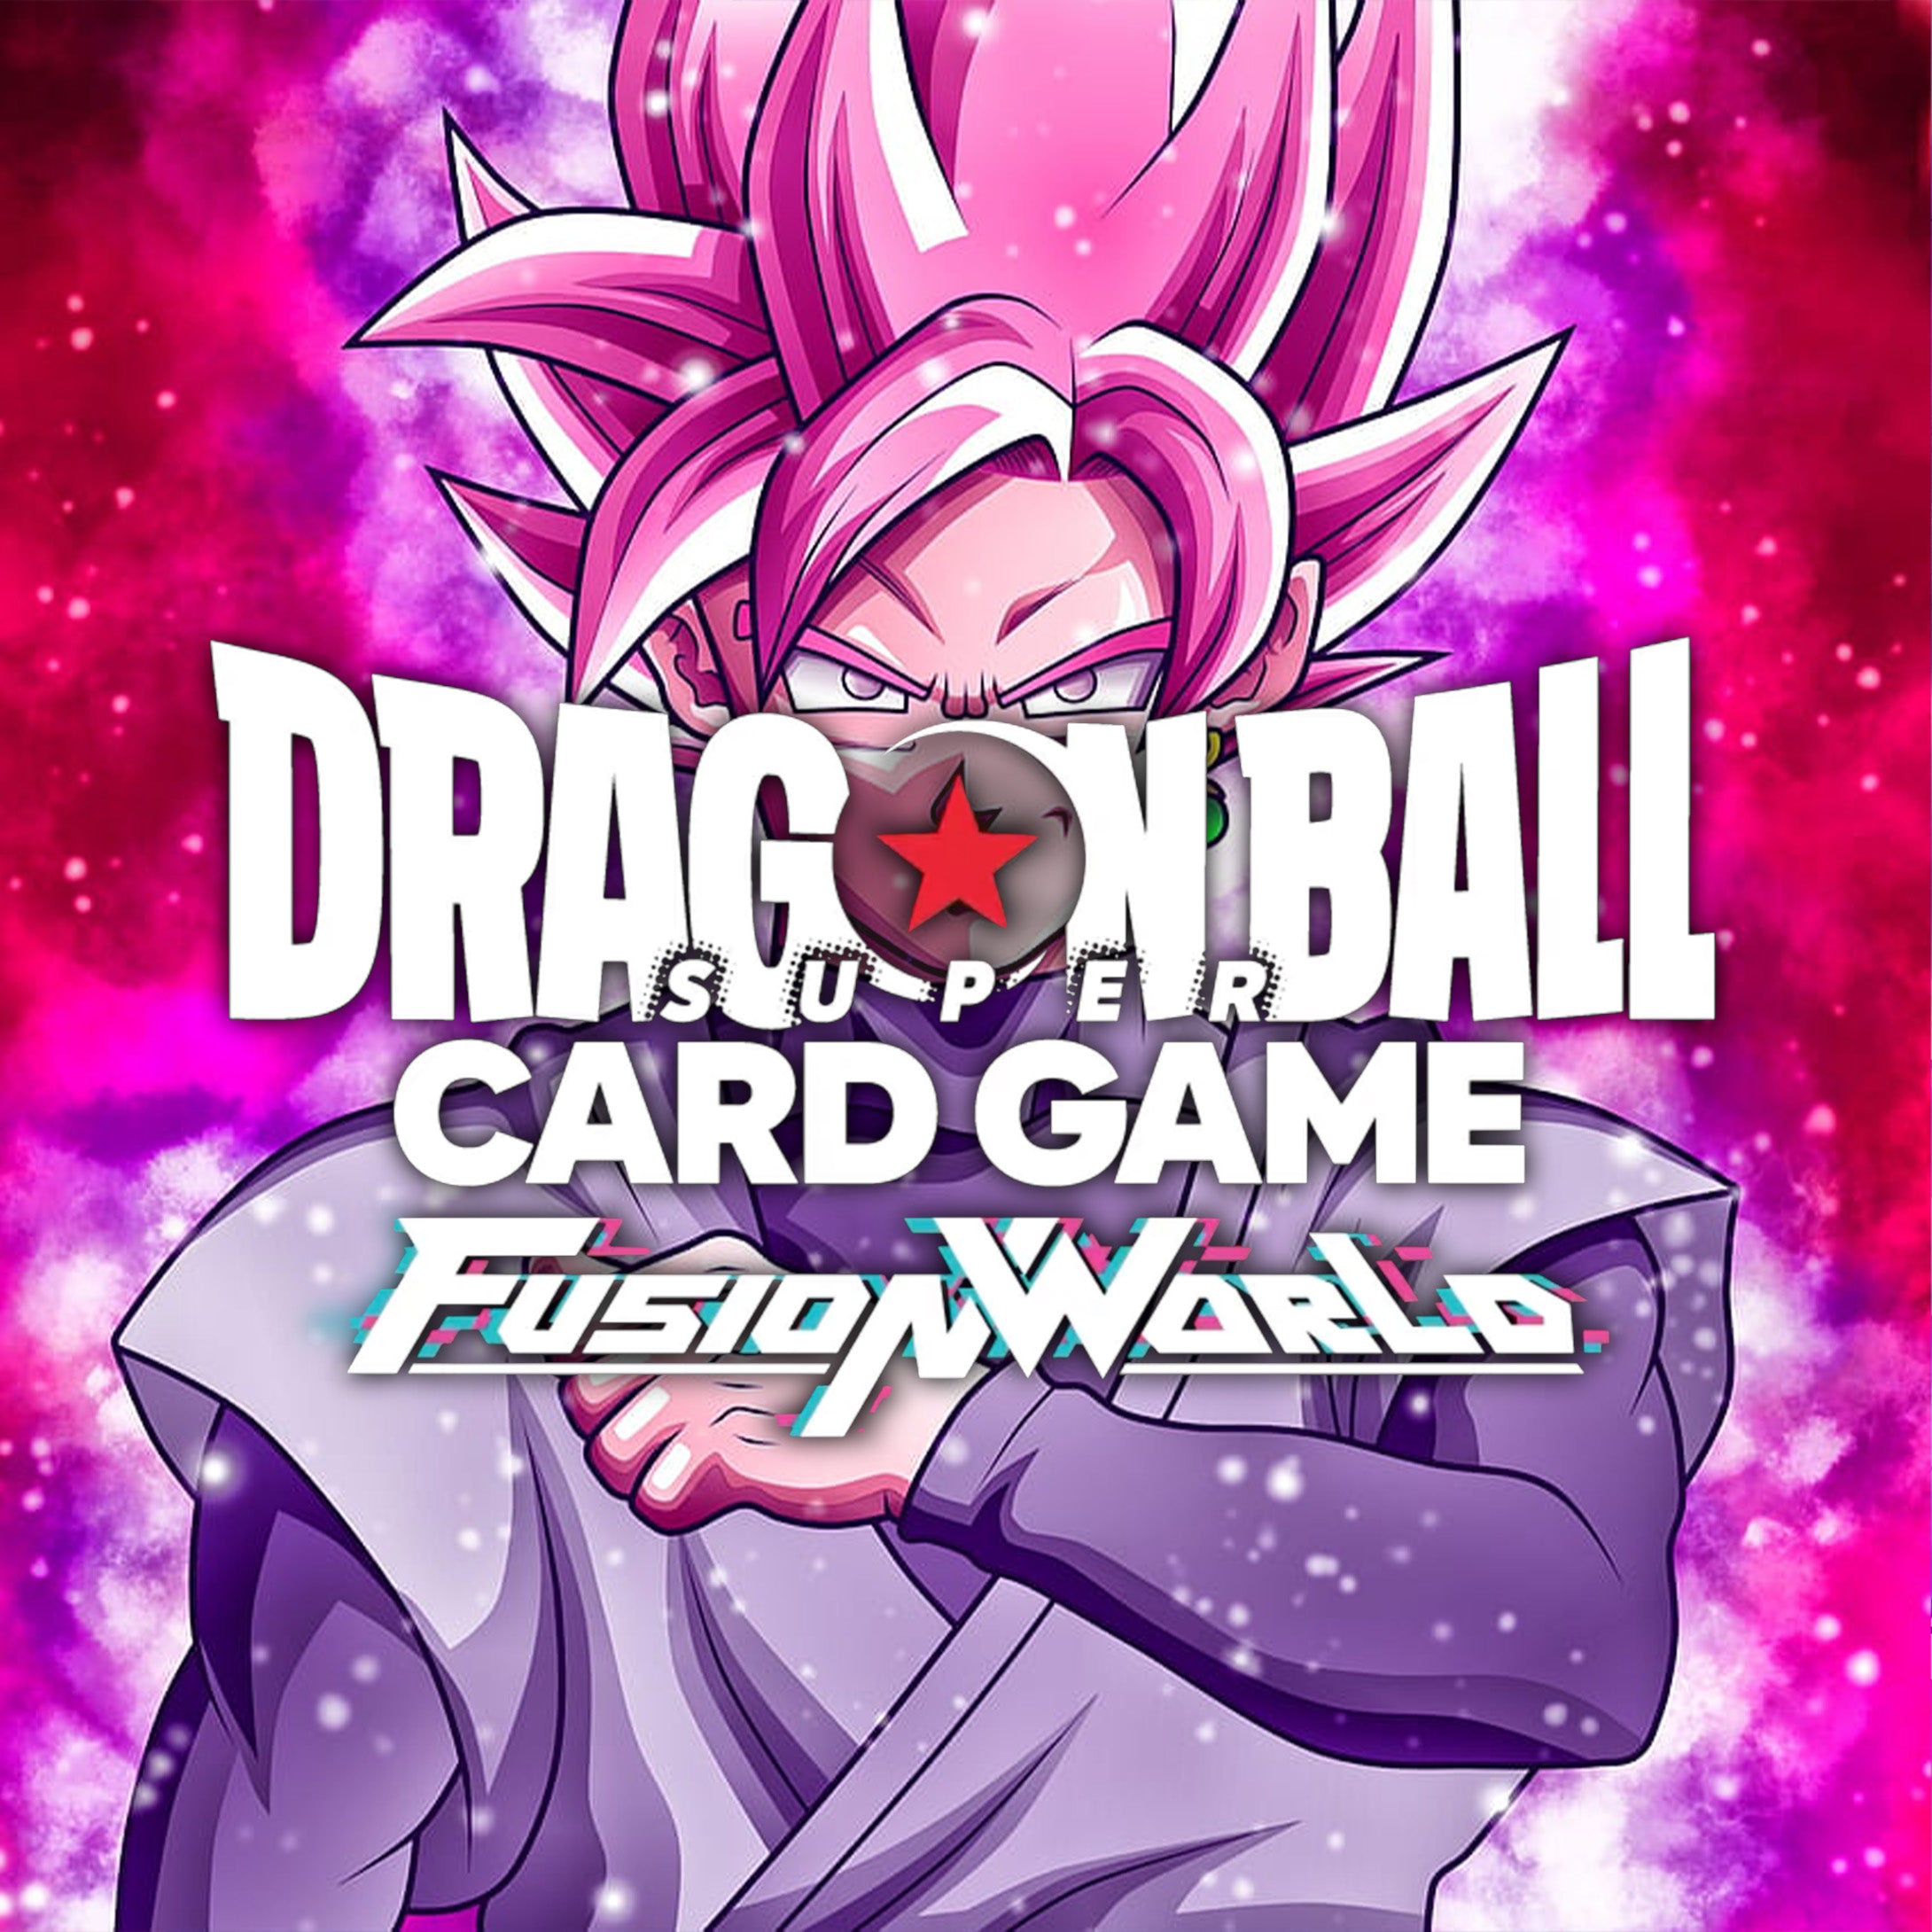 Dragon Ball Super Card Game Fusion World Booster Boxes